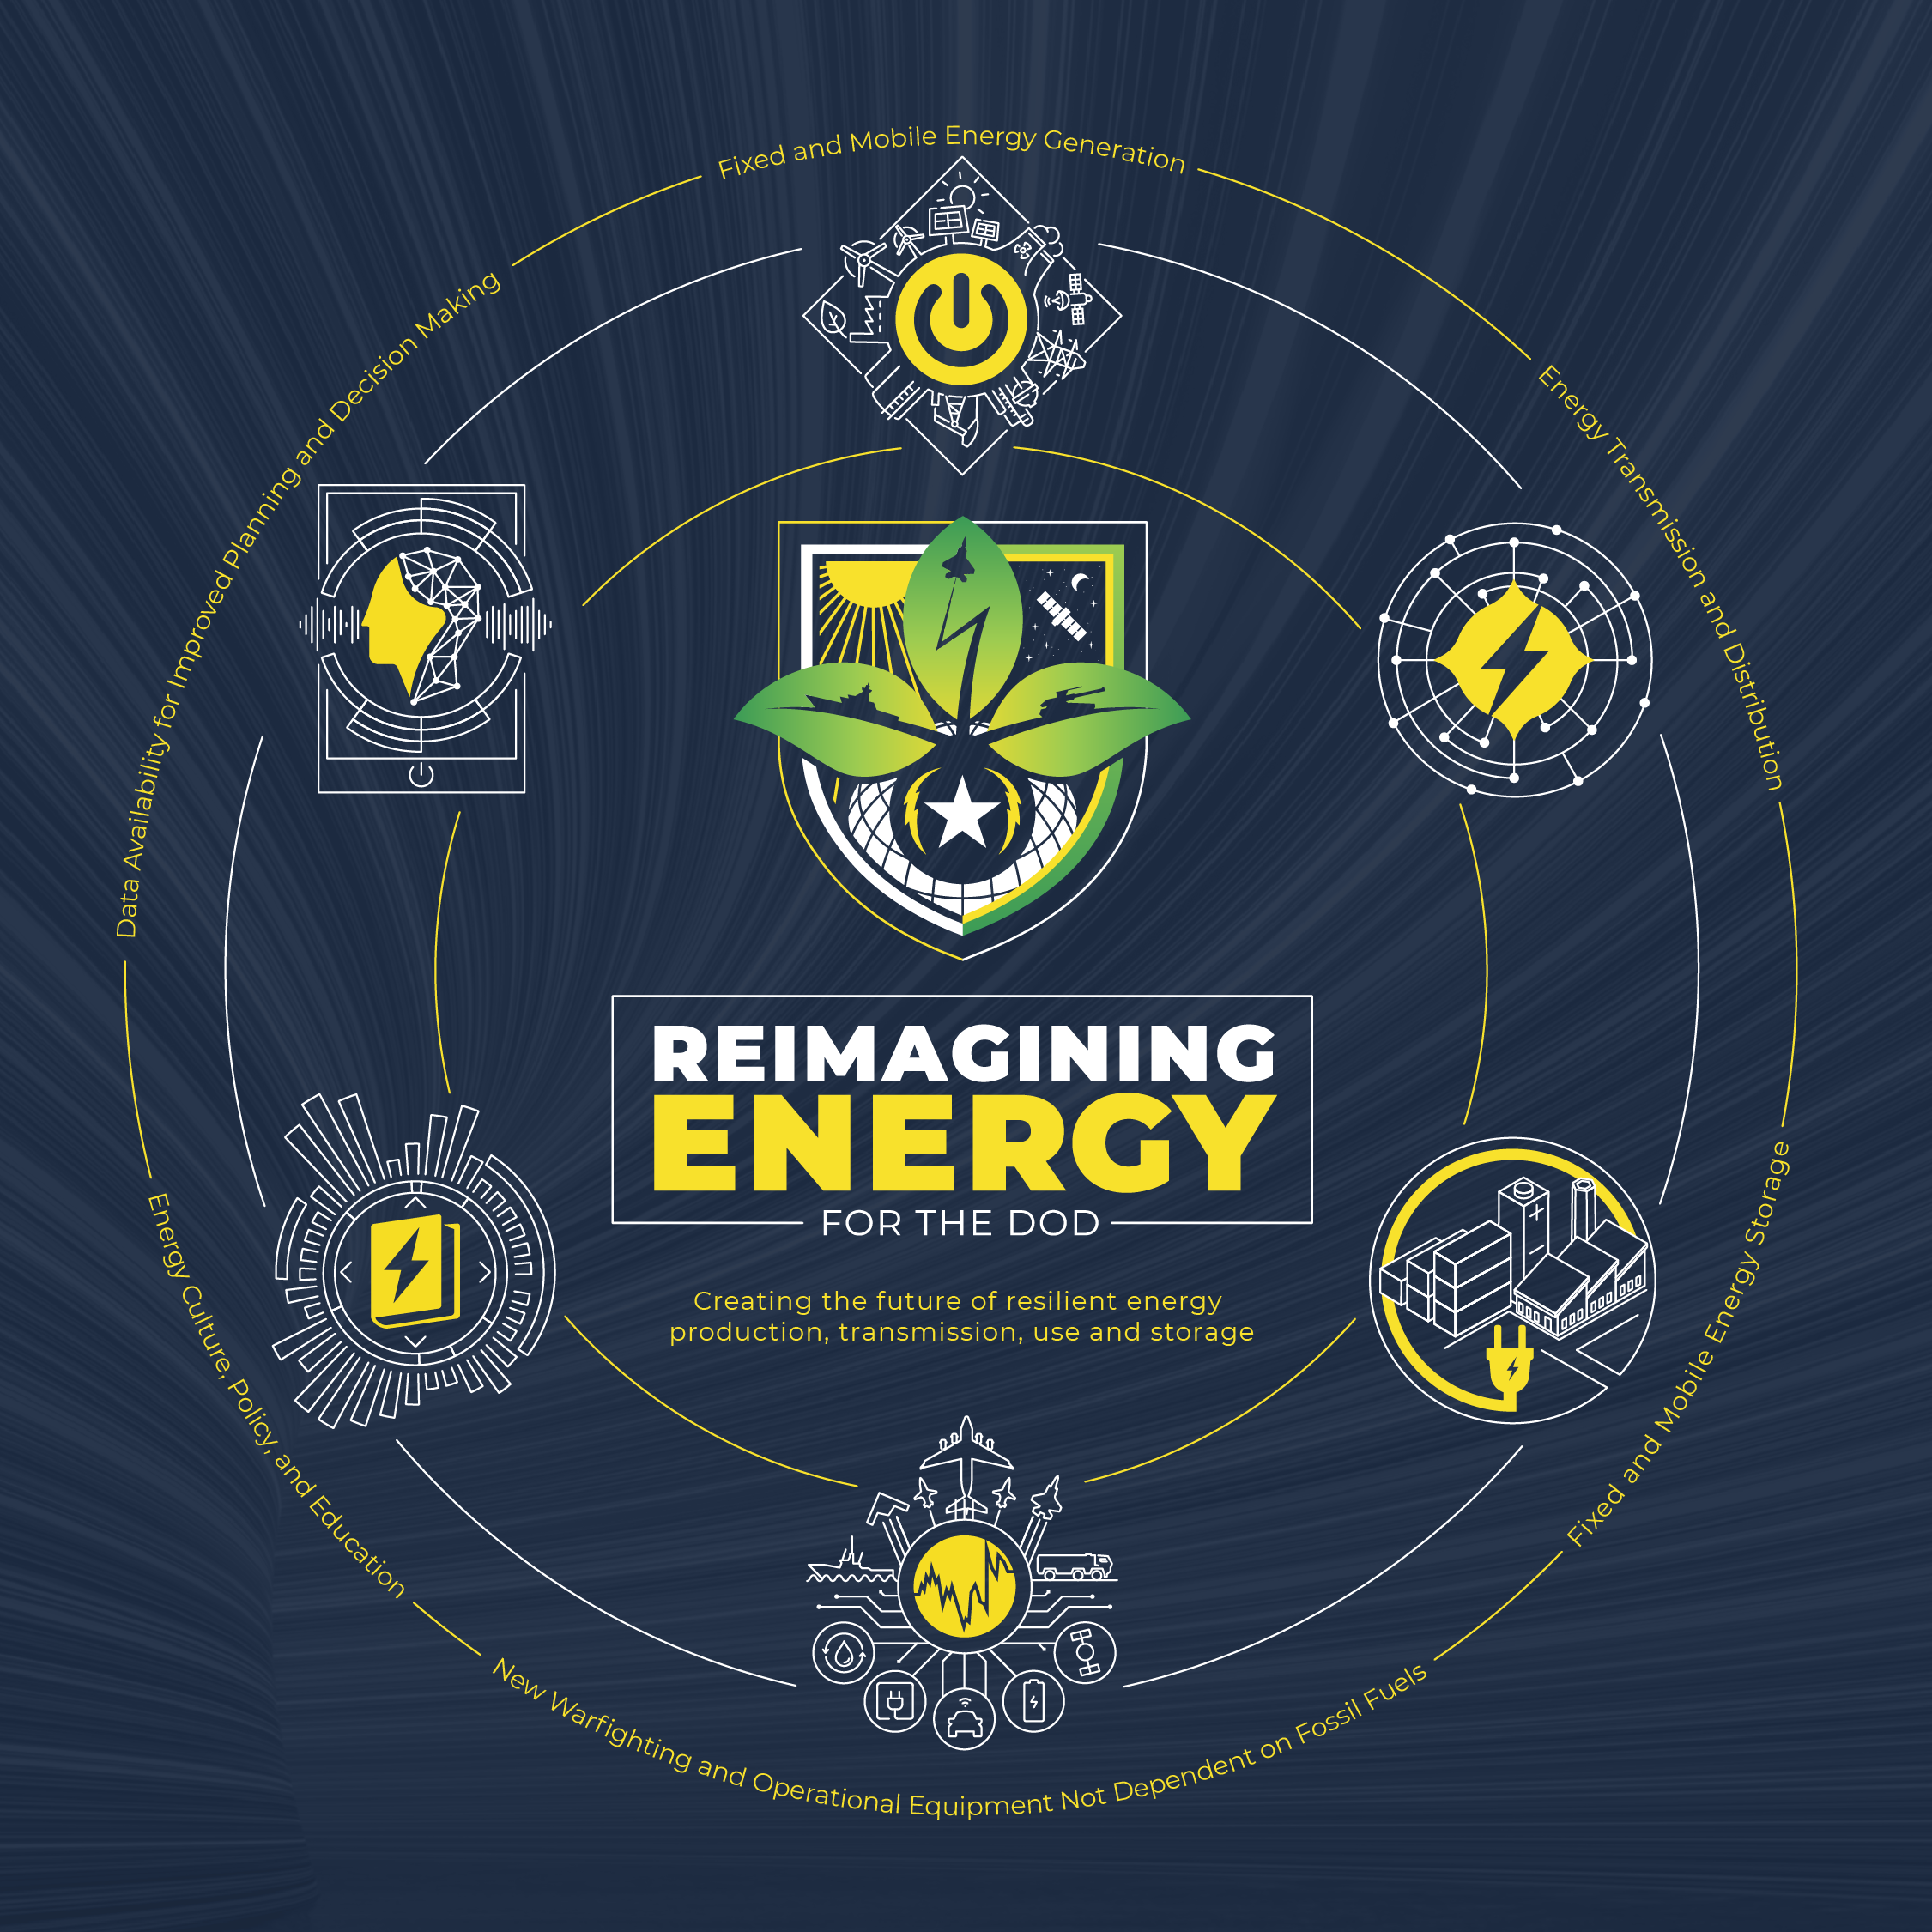 AFWERX Announces New Energy Challenge for the US DoD